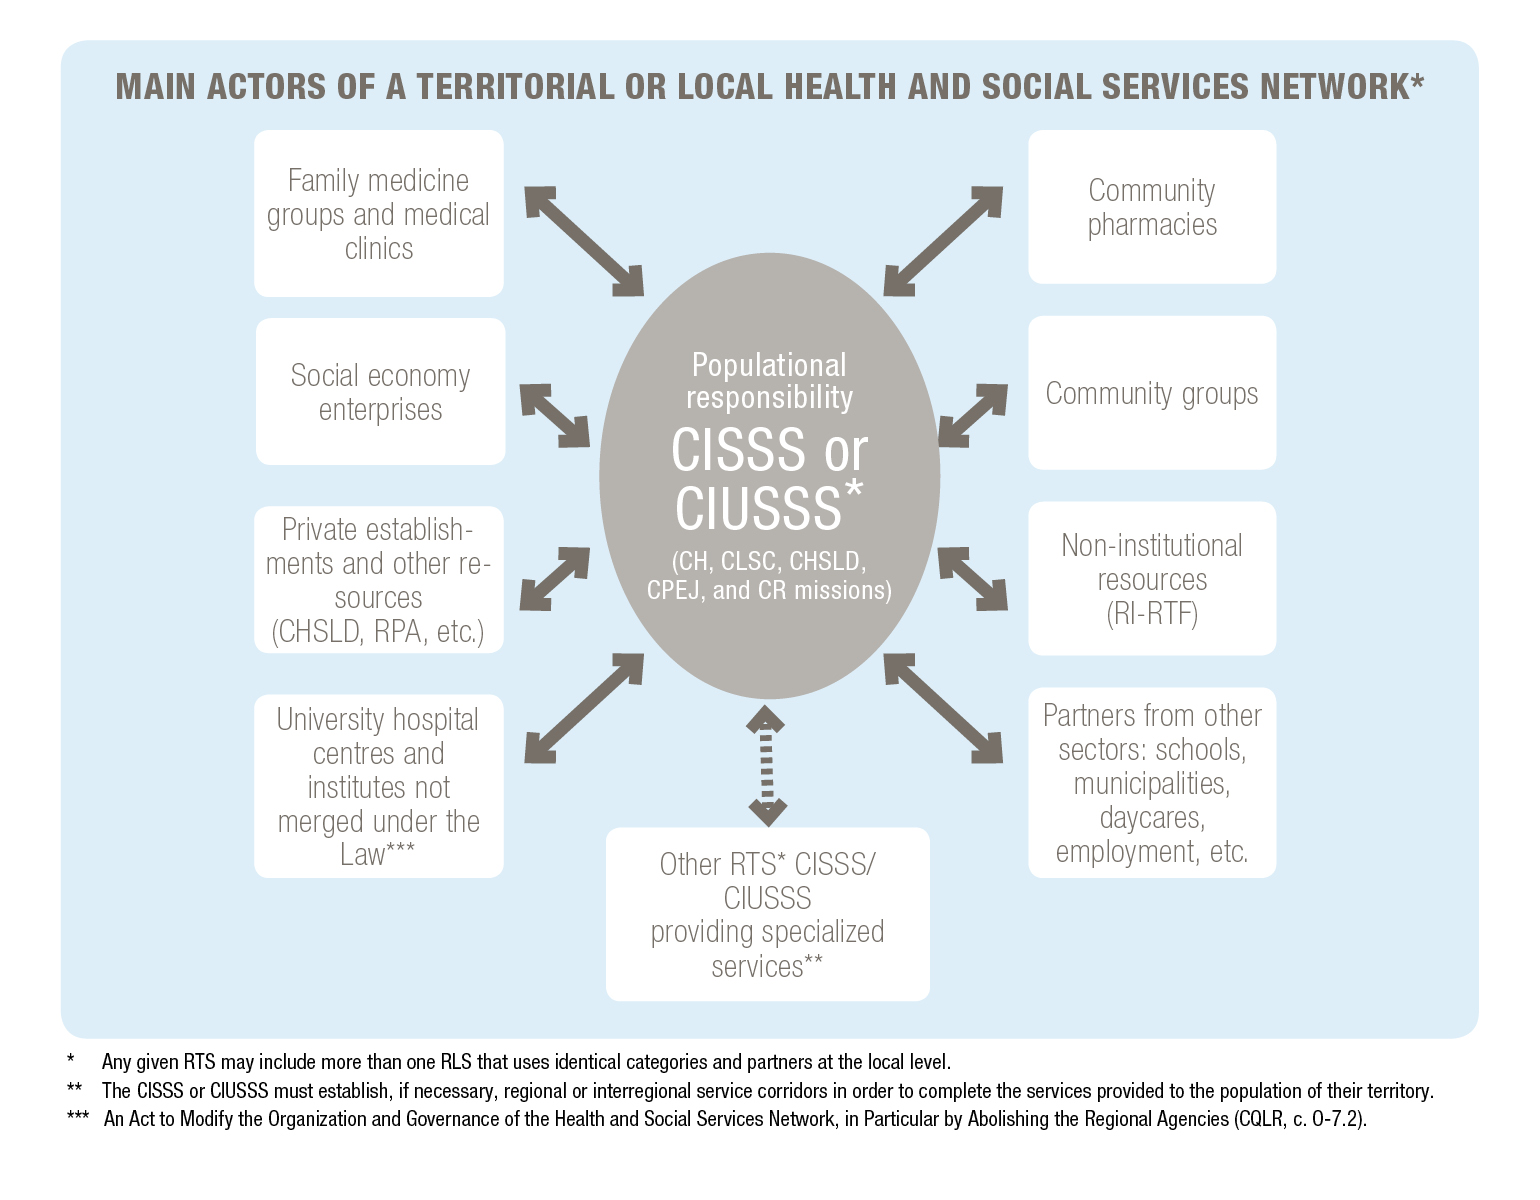 Representation of a local health and social services network